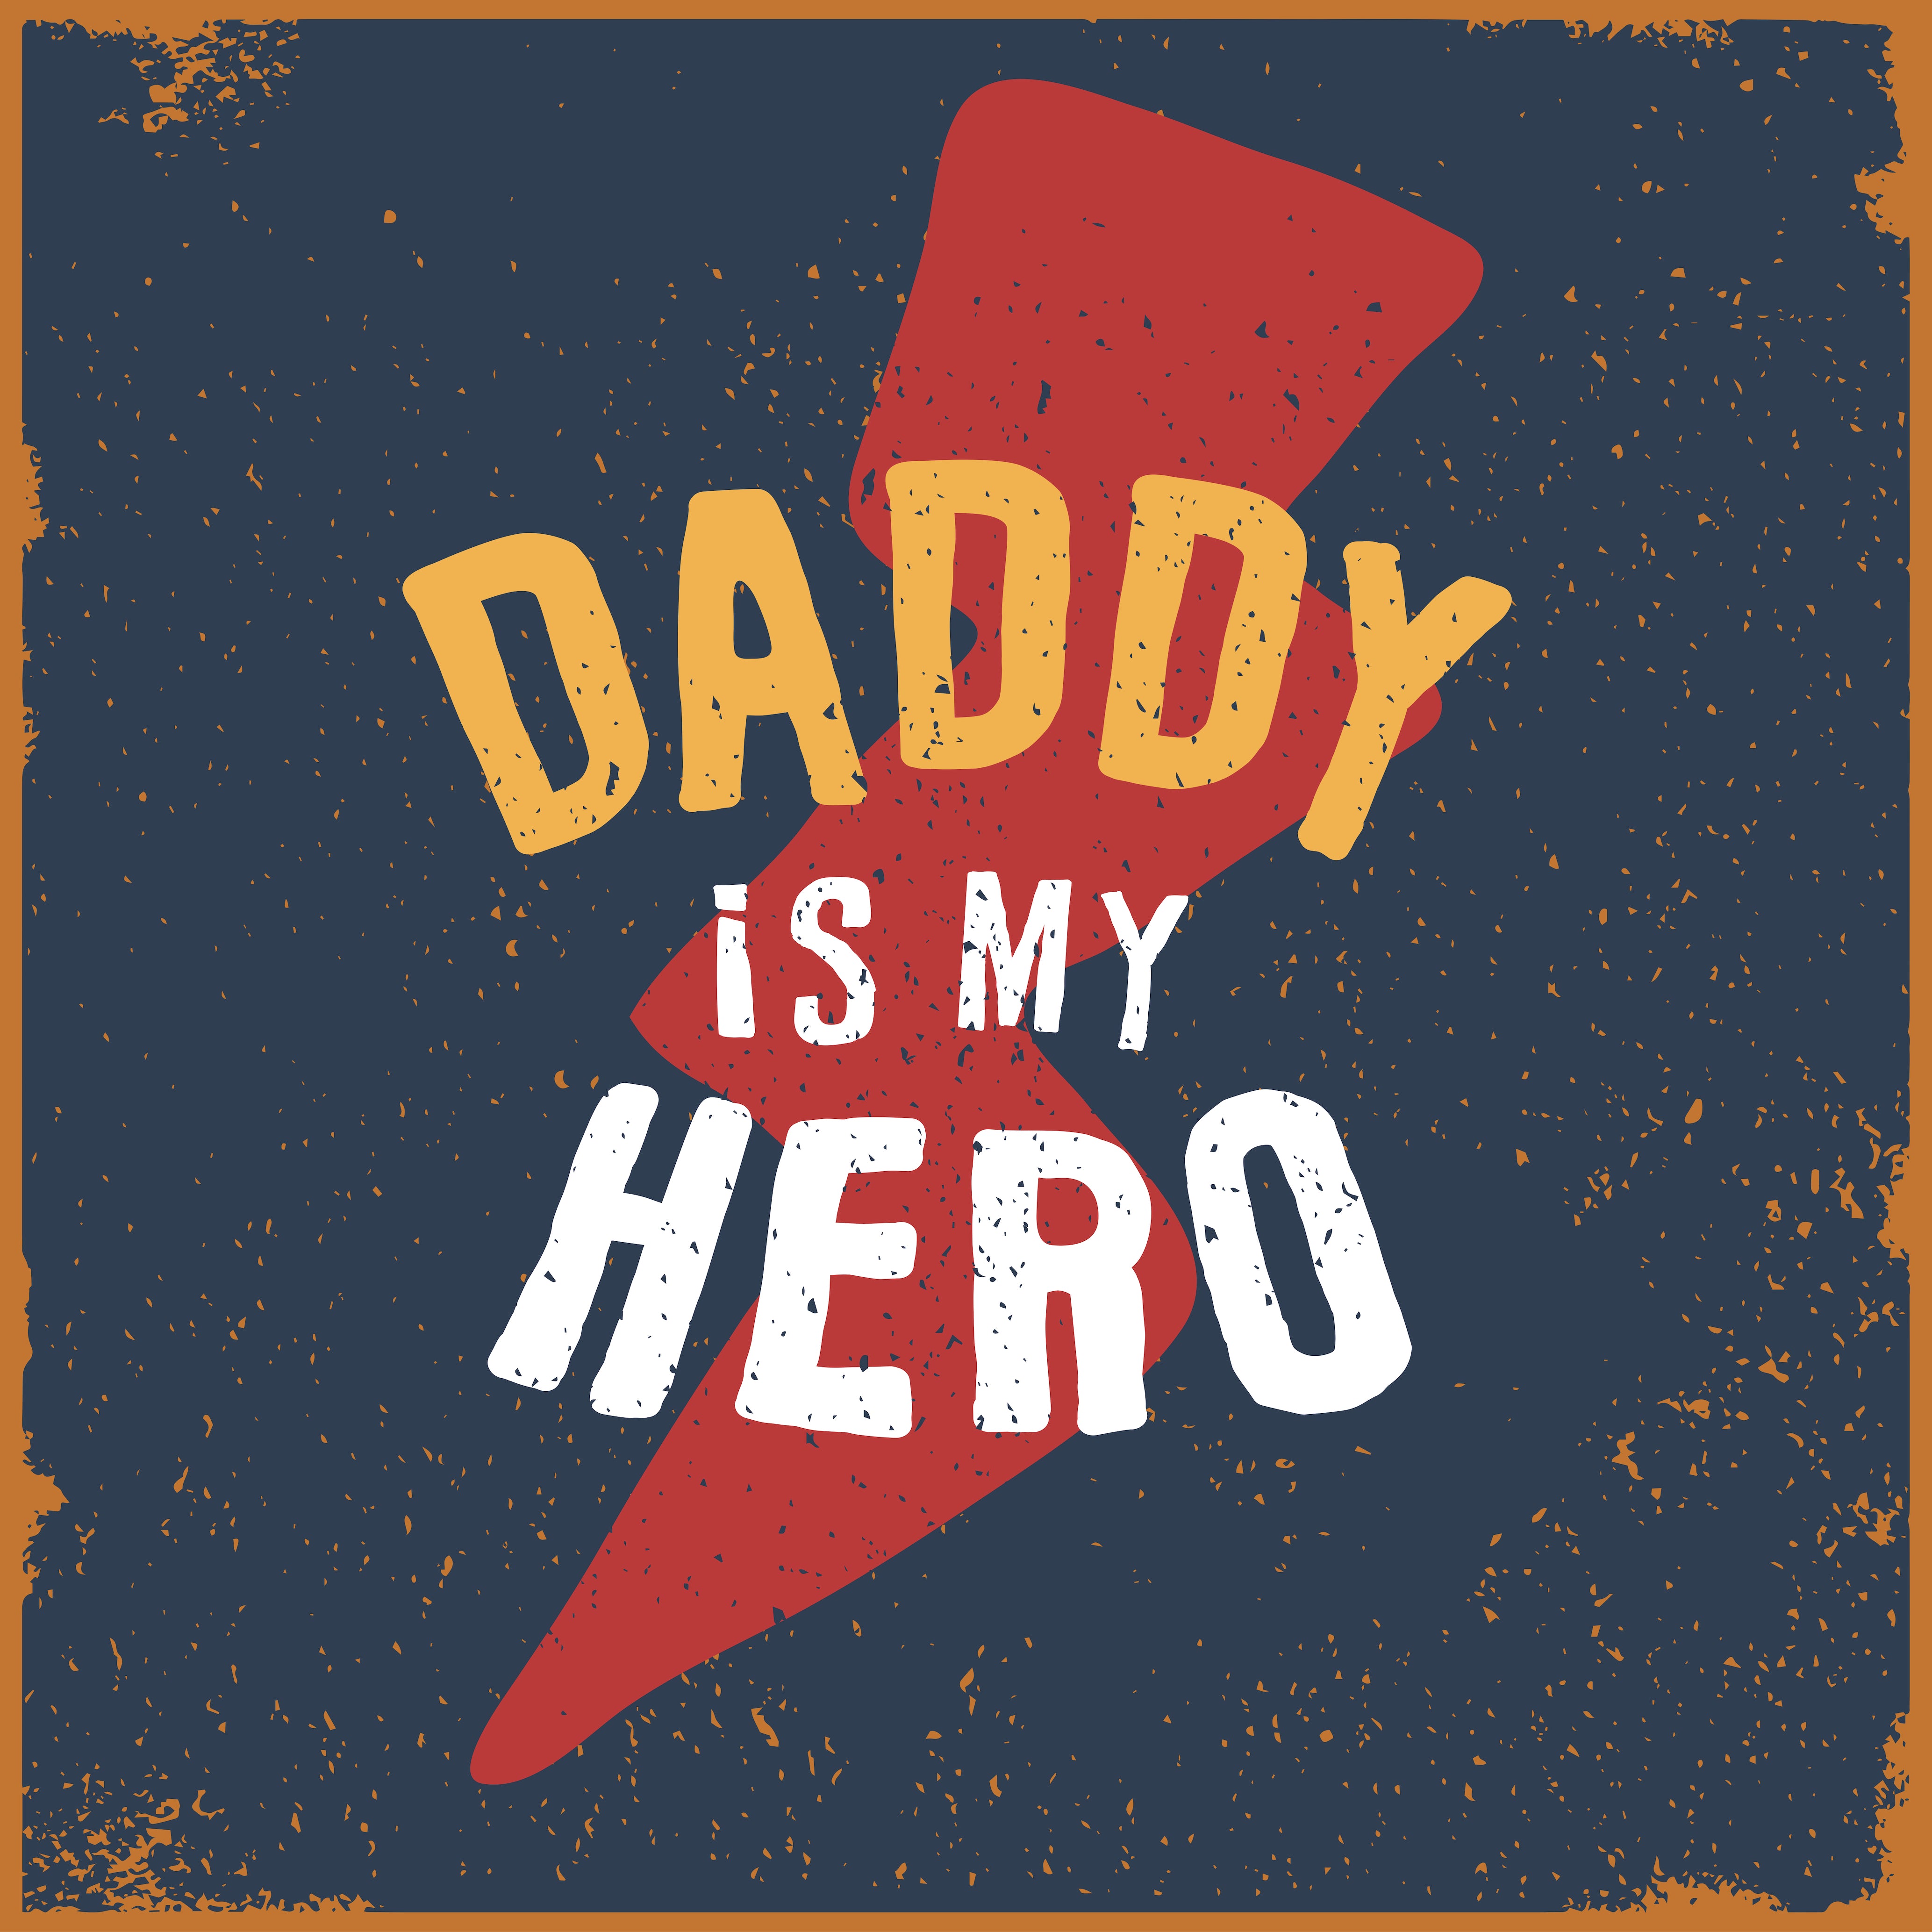 DADDY IS MY HERO